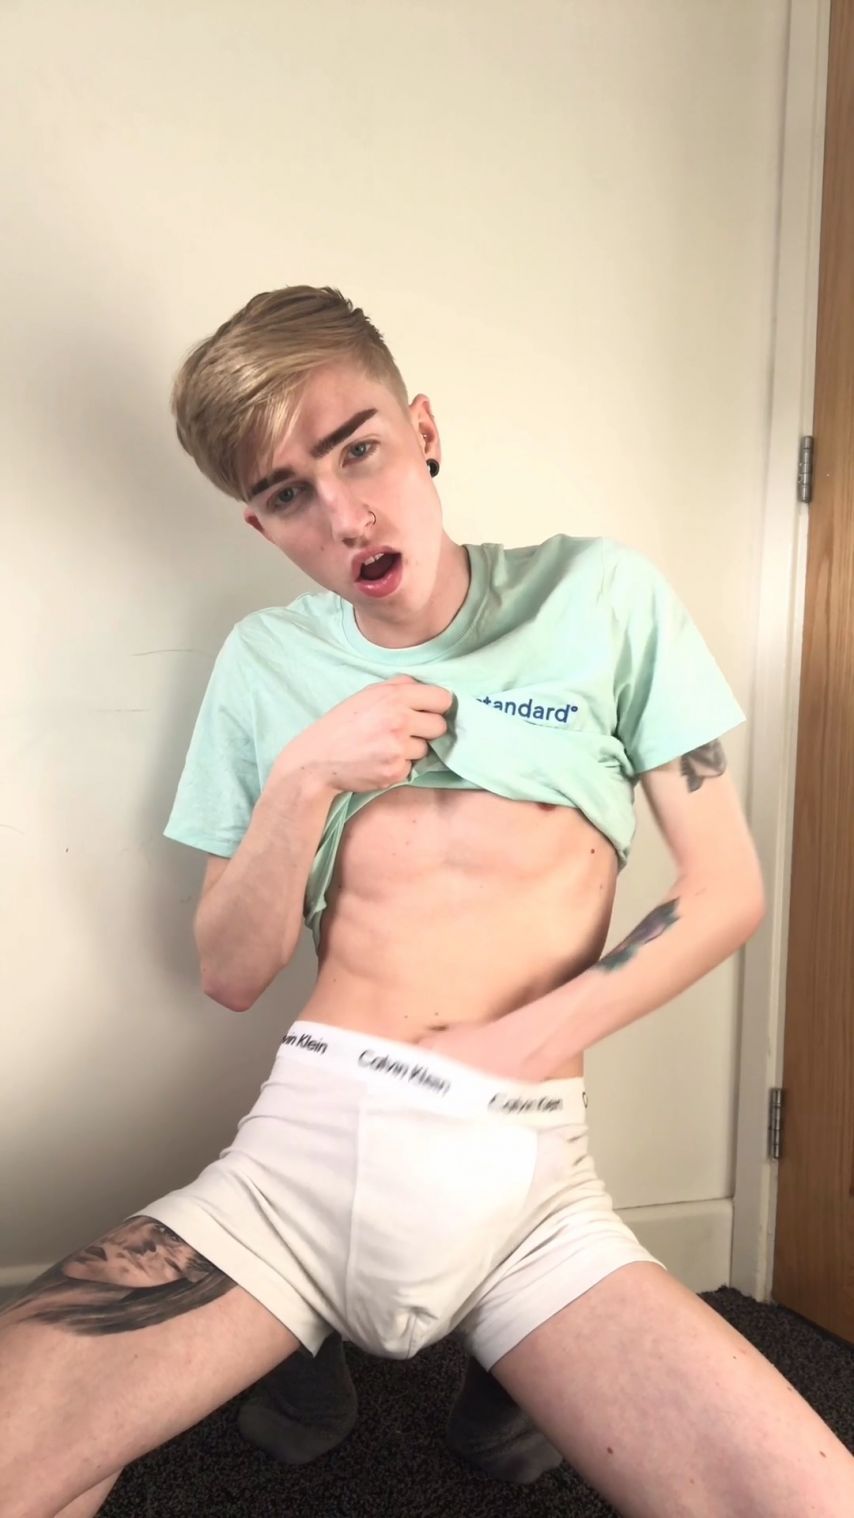 Pretty Boy Twink plays with his BIG Dick